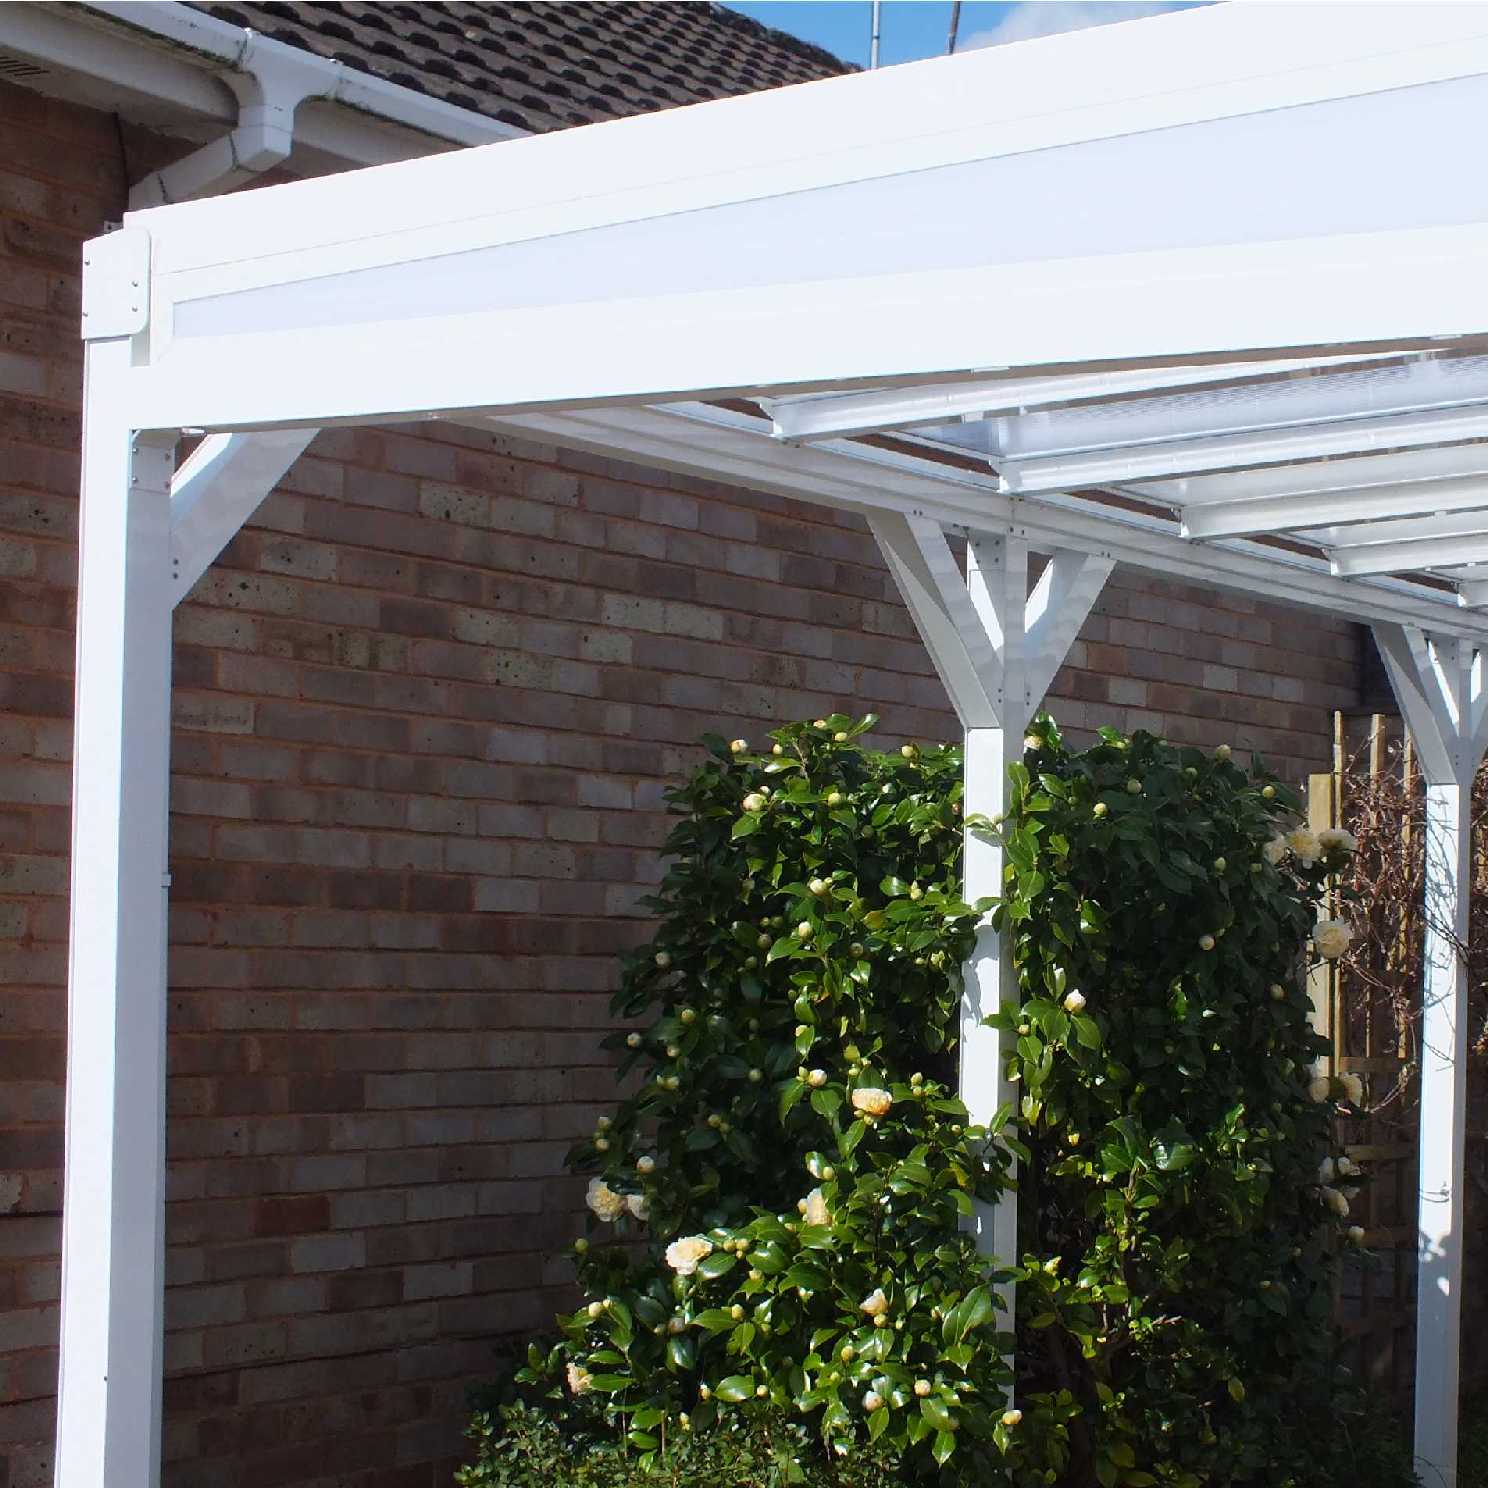 Omega Smart Lean-To Canopy, White with 16mm Polycarbonate Glazing - 3.1m (W) x 1.5m (P), (2) Supporting Posts from Omega Build